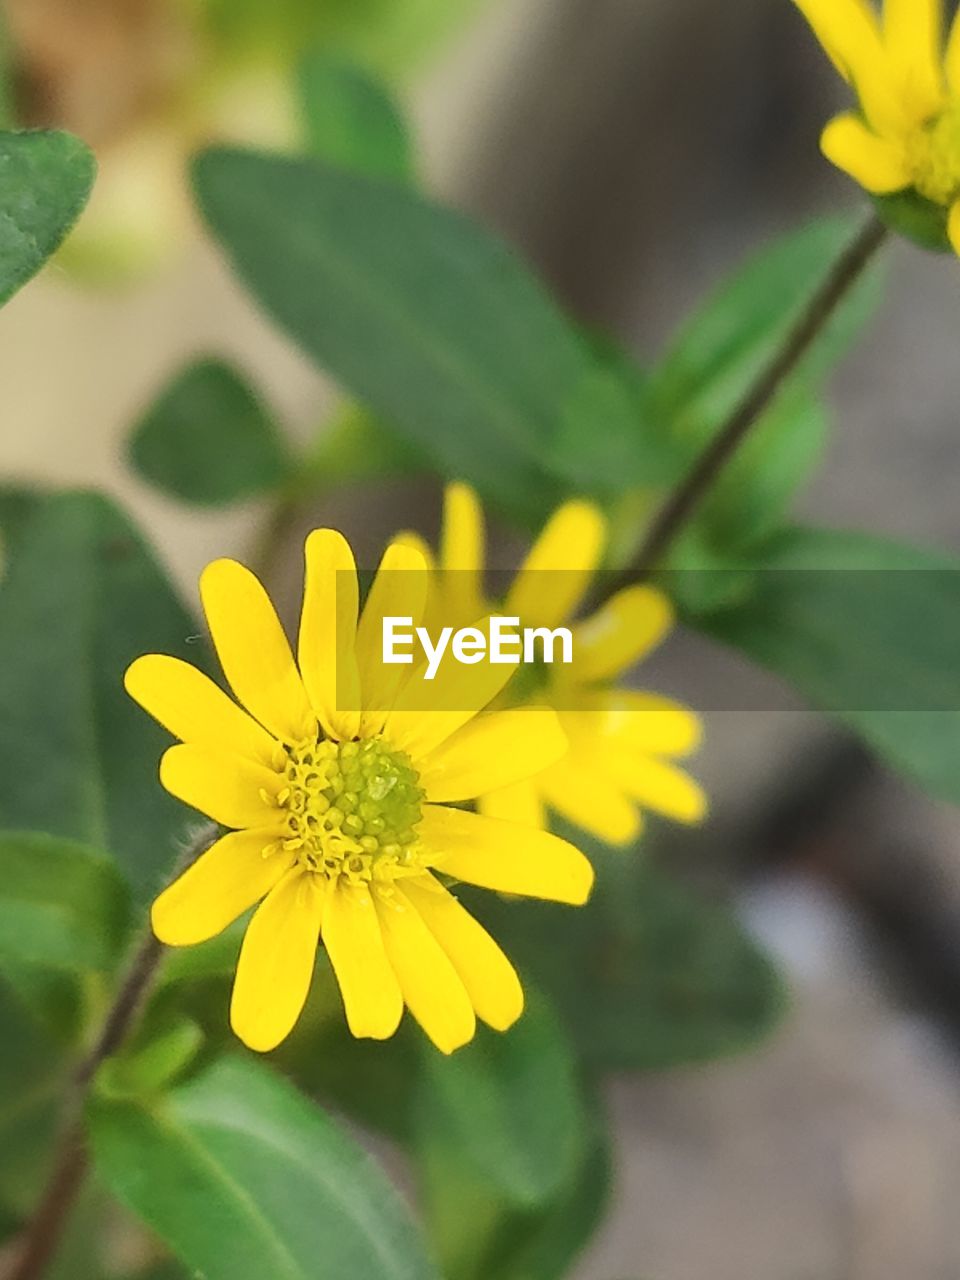 flower, flowering plant, plant, freshness, yellow, beauty in nature, flower head, close-up, nature, growth, fragility, petal, inflorescence, plant part, leaf, summer, no people, focus on foreground, blossom, outdoors, wildflower, green, botany, springtime, selective focus, vibrant color, environment, day, pollen